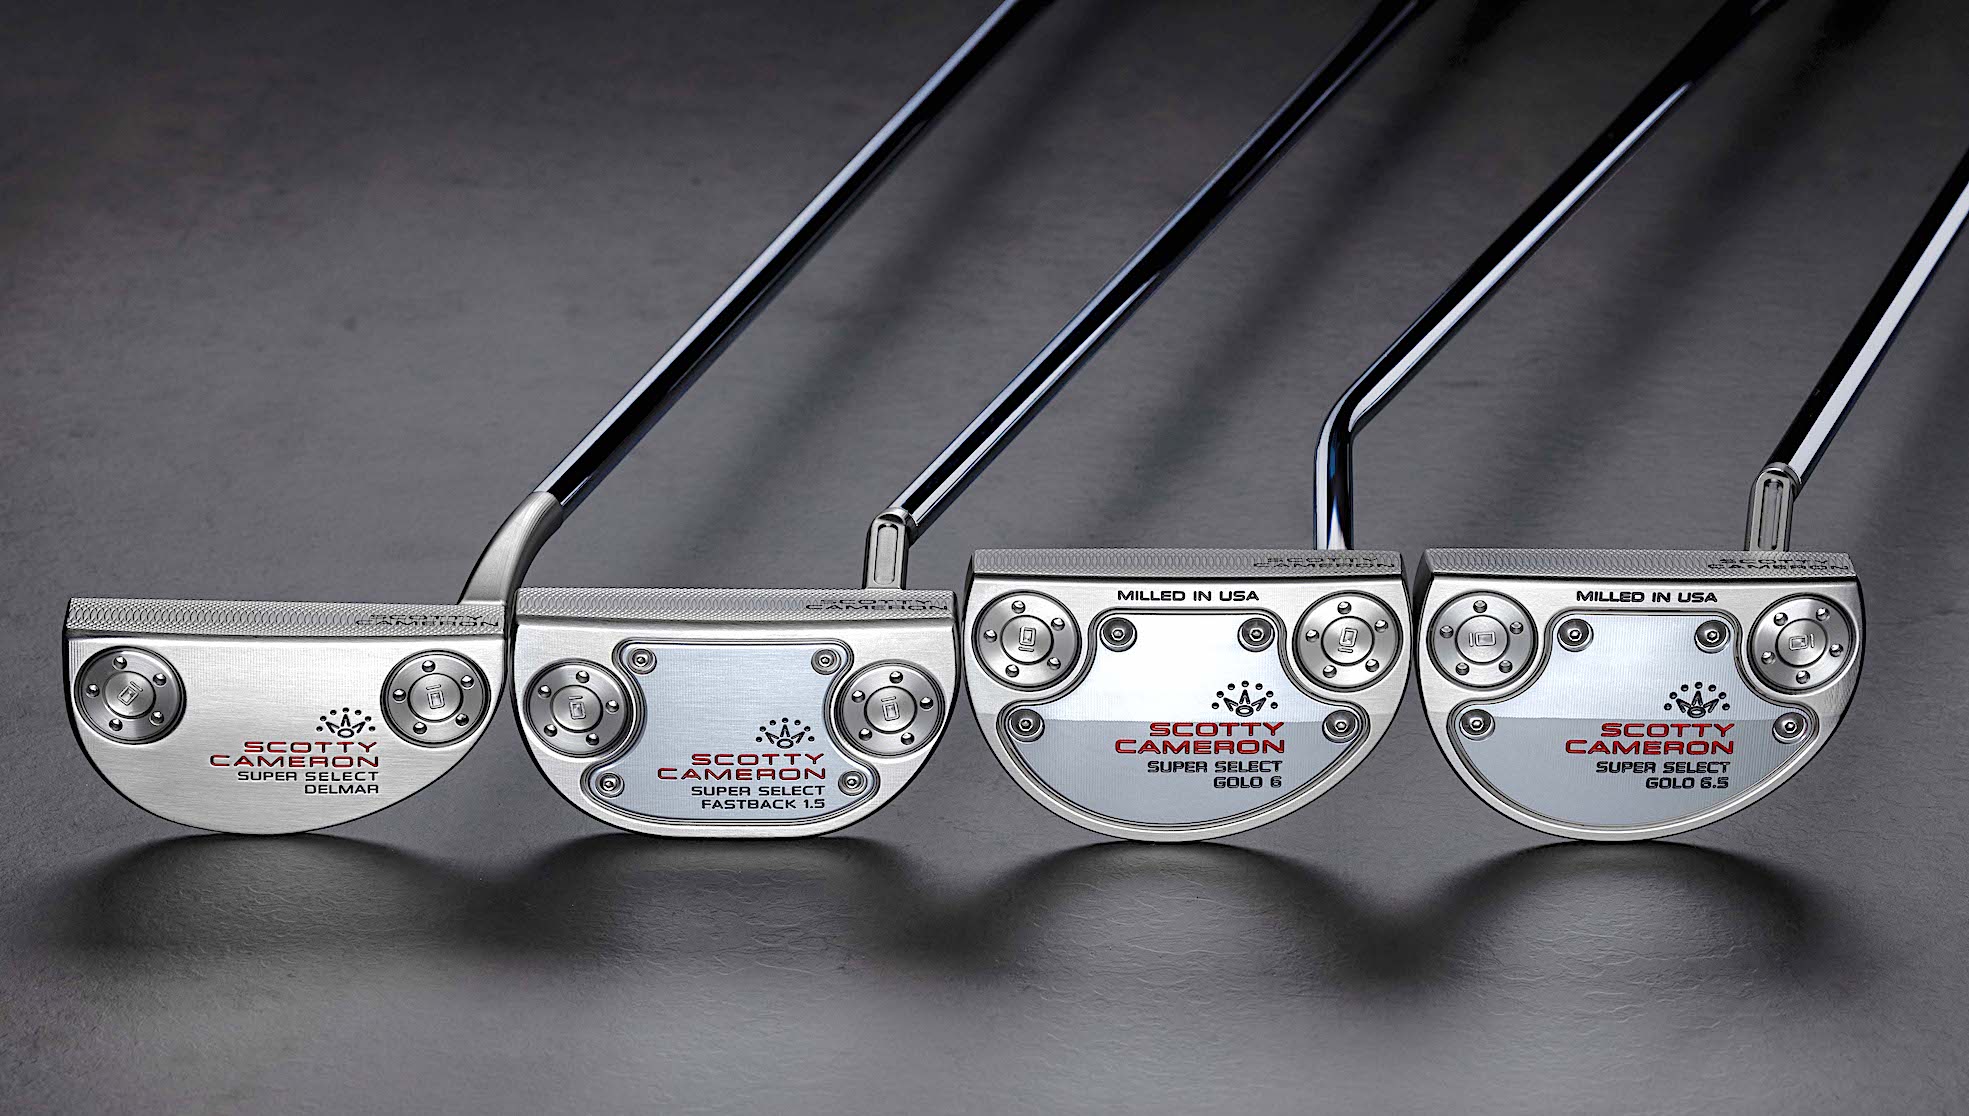 The Scotty Cameron Super Select Del Mar, Fastback 1.5, GOLO 6 and GOLO 6.5 group of putters